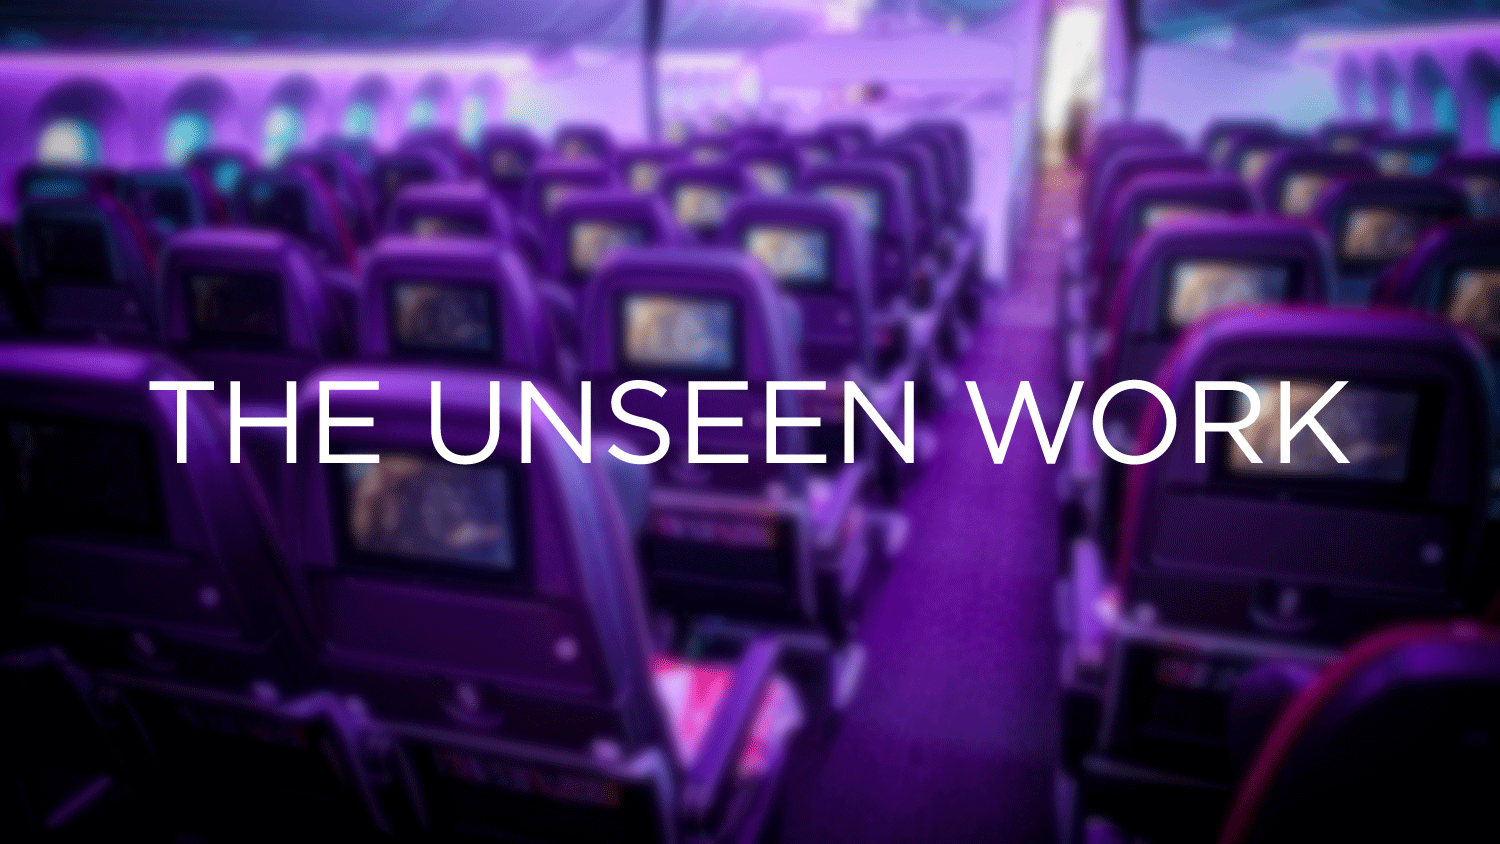 The Unseen Work